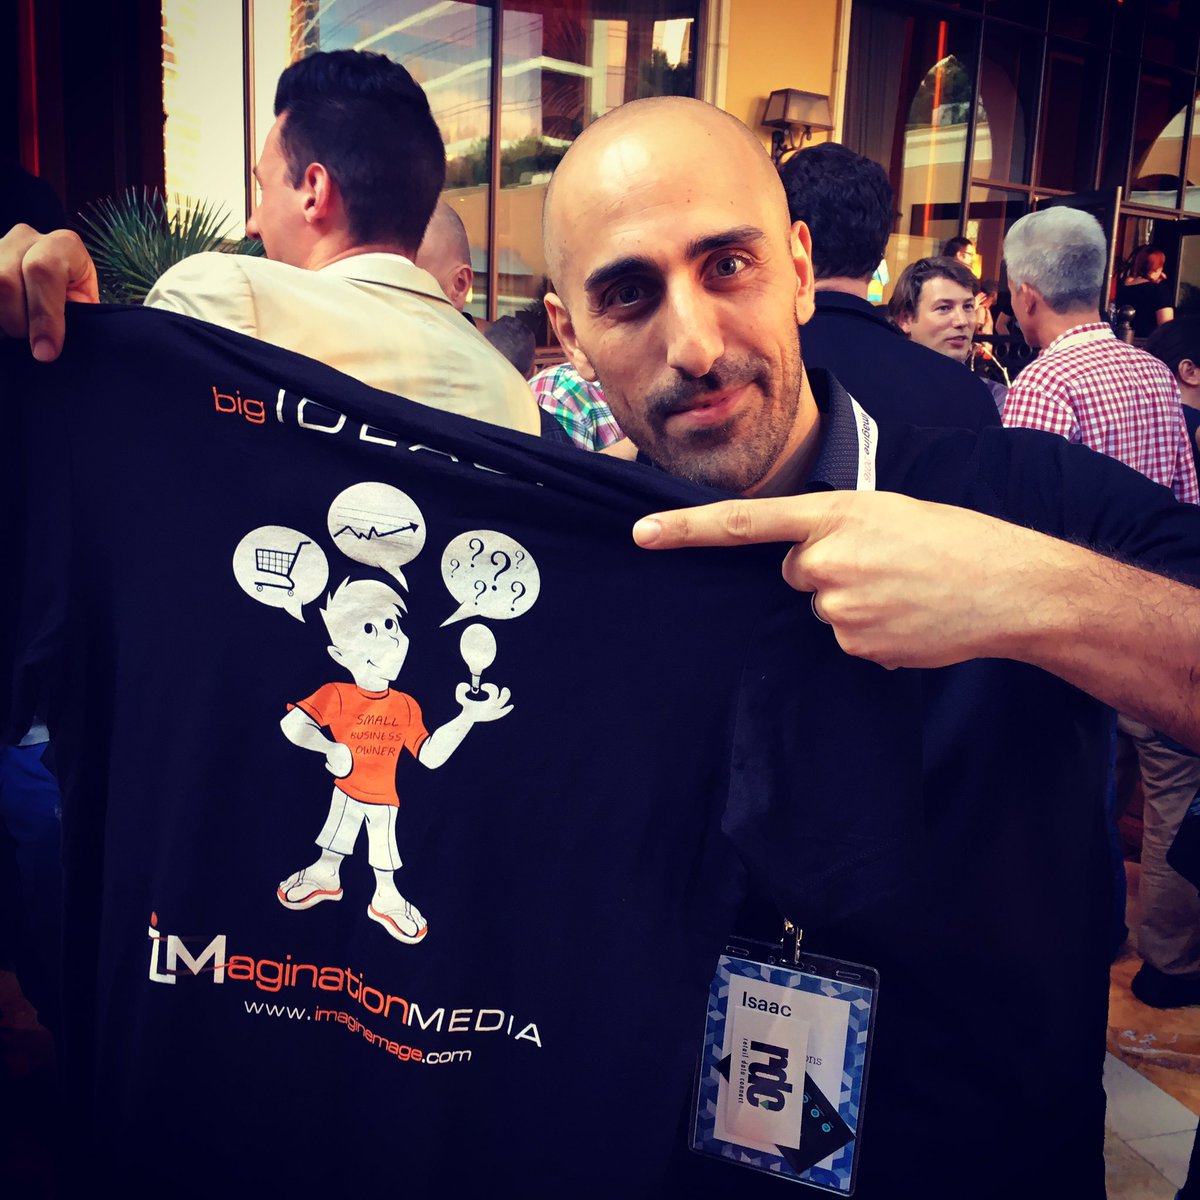 isaacmoshe: Great to meet the guys at @imgmage! Here's to winning that drone :) #MagentoImagine https://t.co/0Xybsvt7Bc